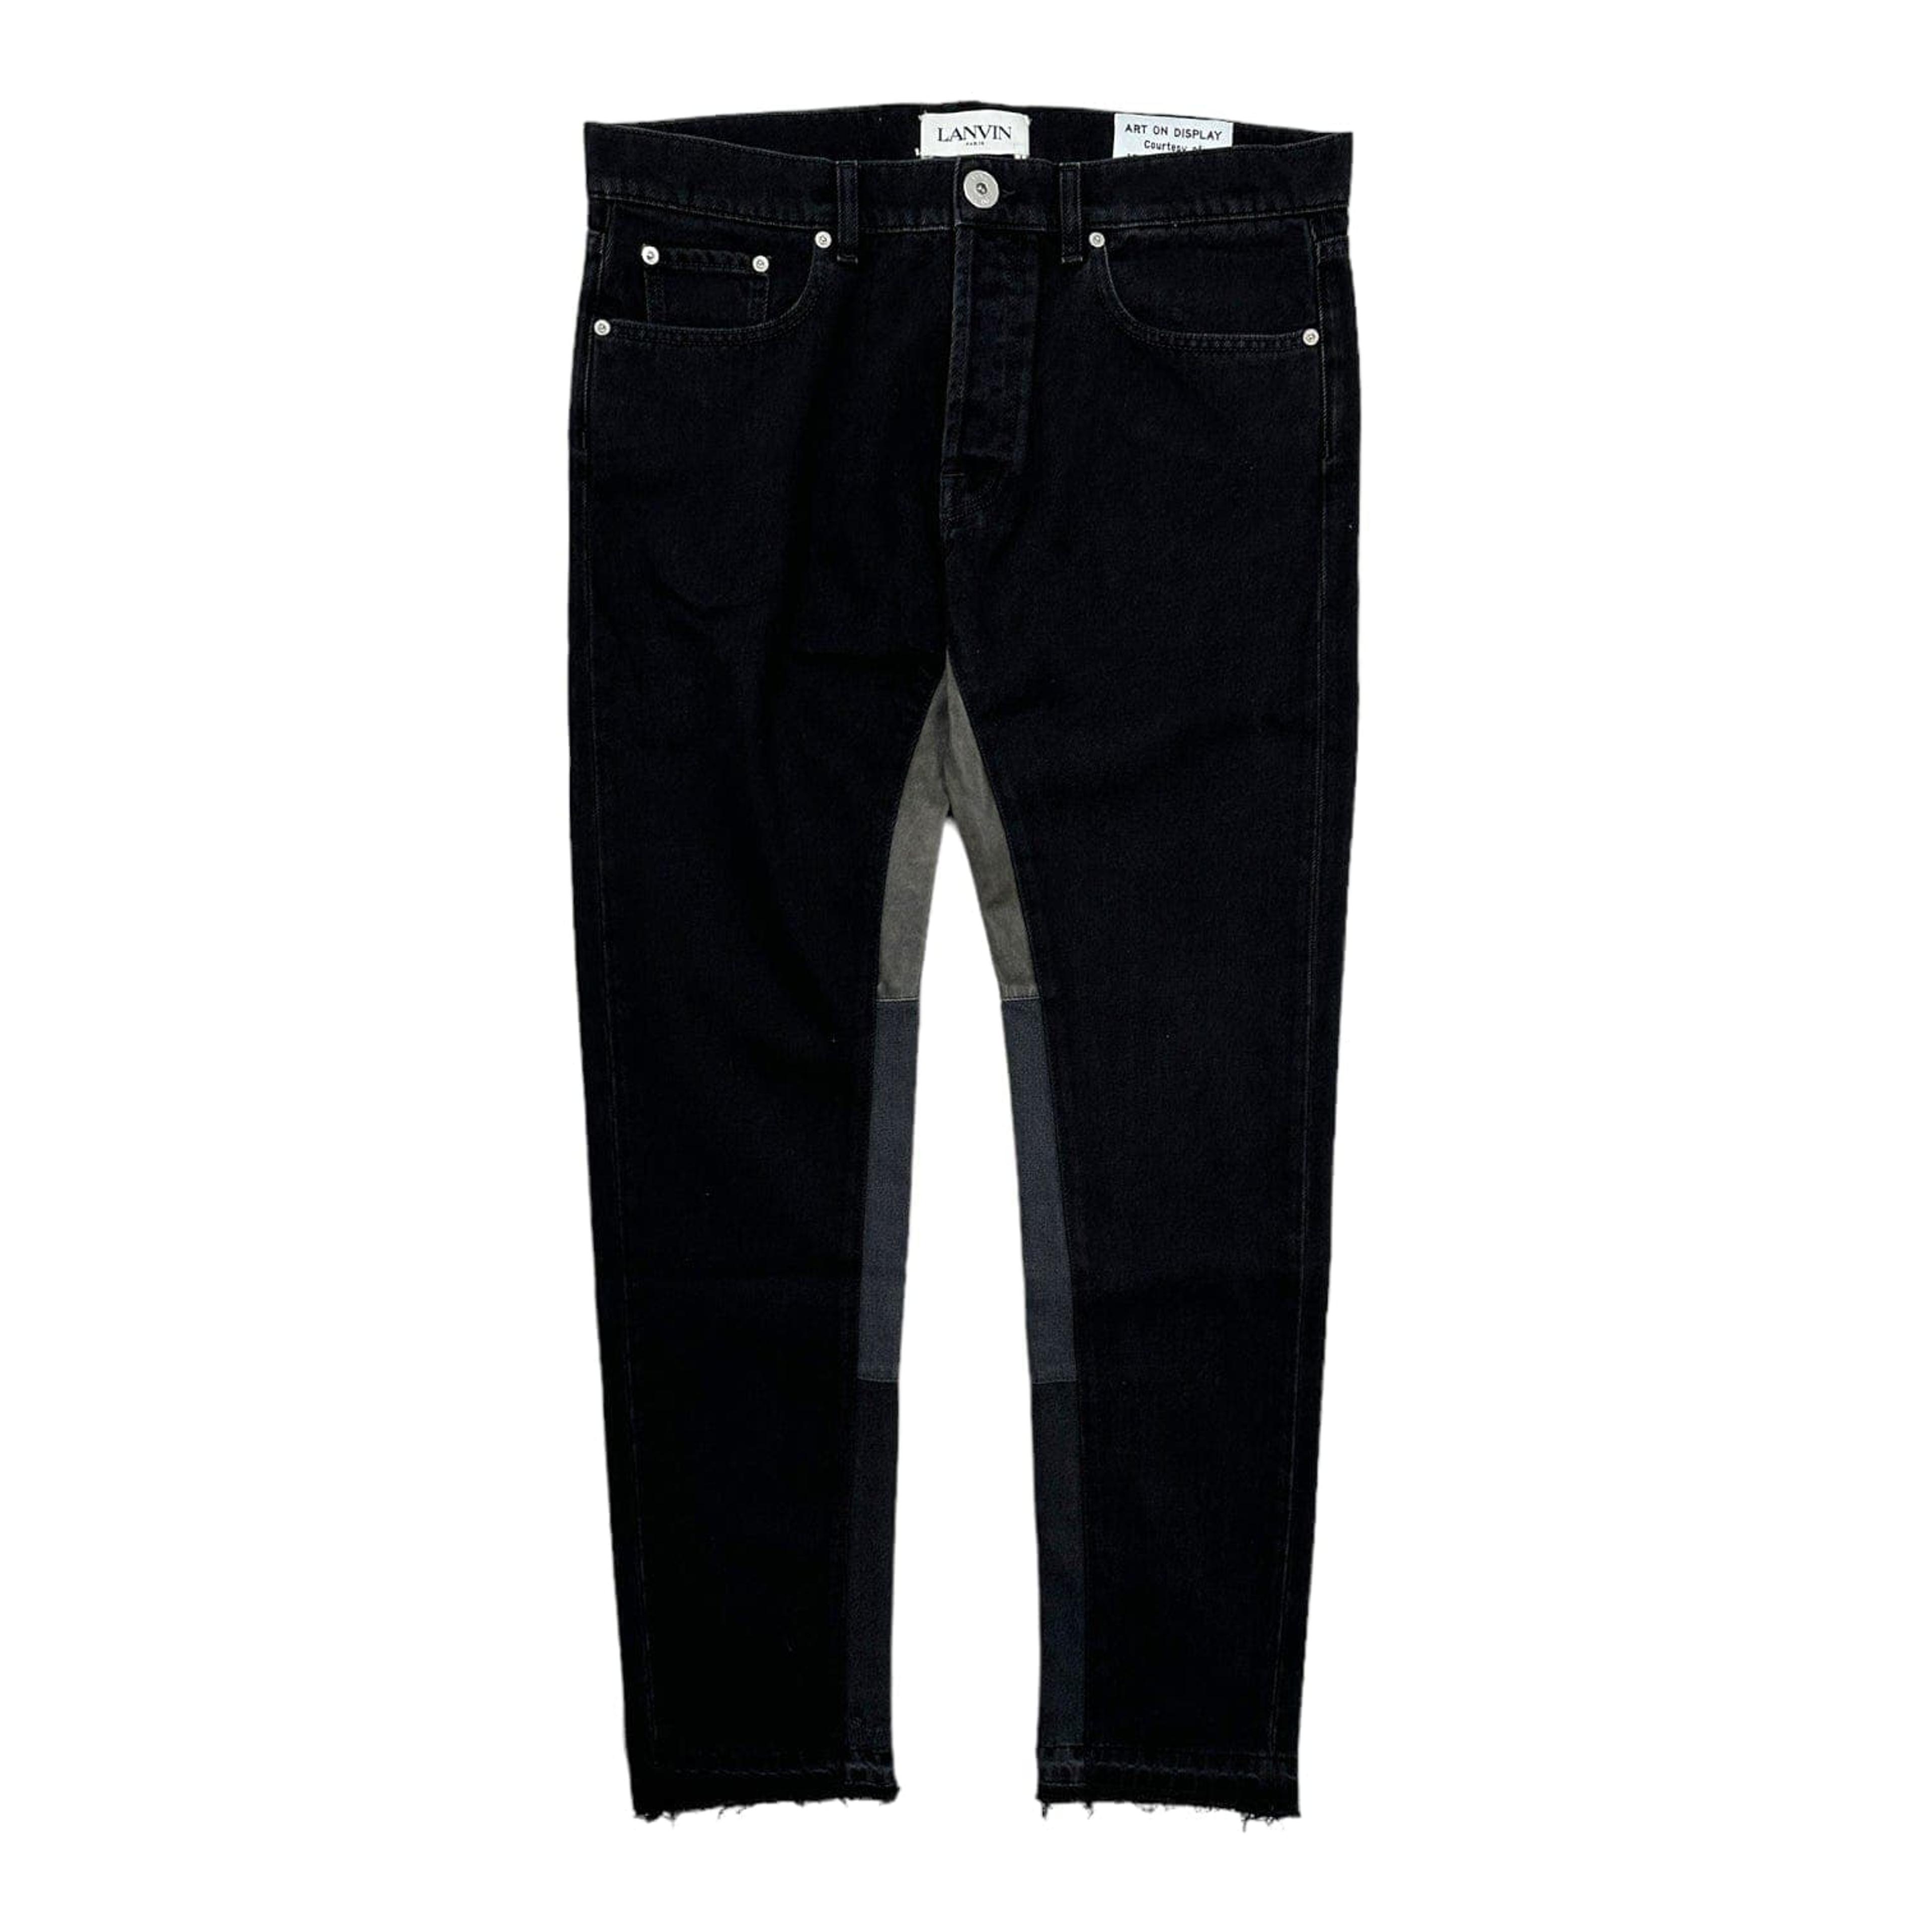 Gallery Dept. x Lanvin Jeans Black (Collection 2) Pre-Owned